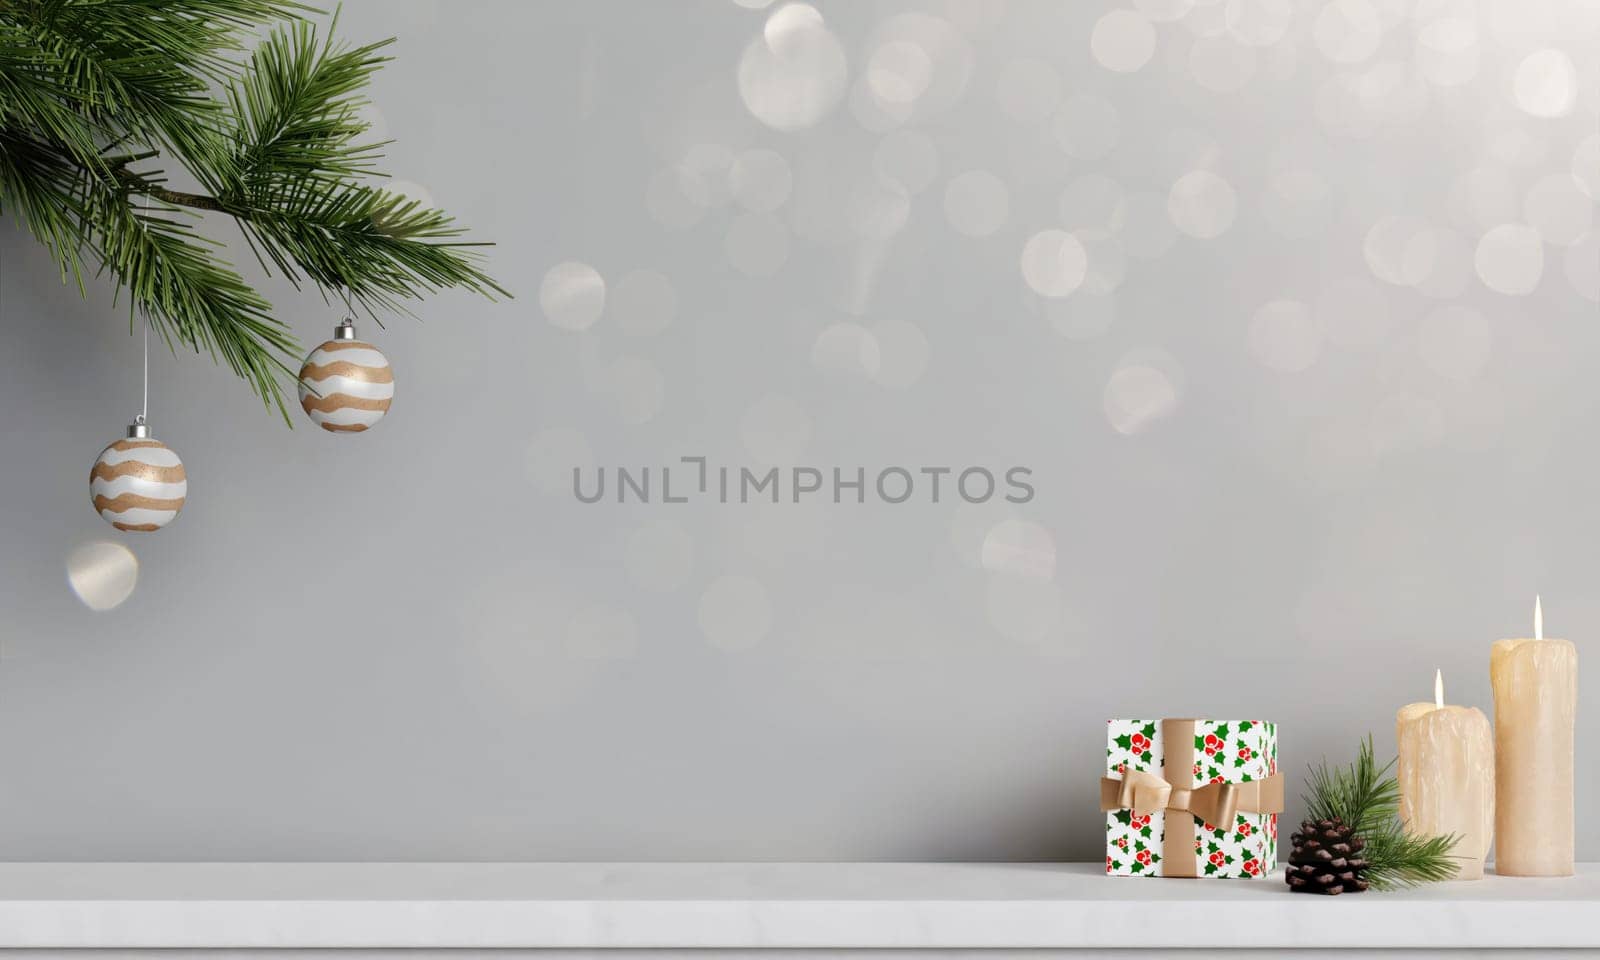 Christmas interior wall mockup with hanging pine branches with holiday decorations above rustic marble shelf on empty white background. 3D rendering, illustration. by meepiangraphic